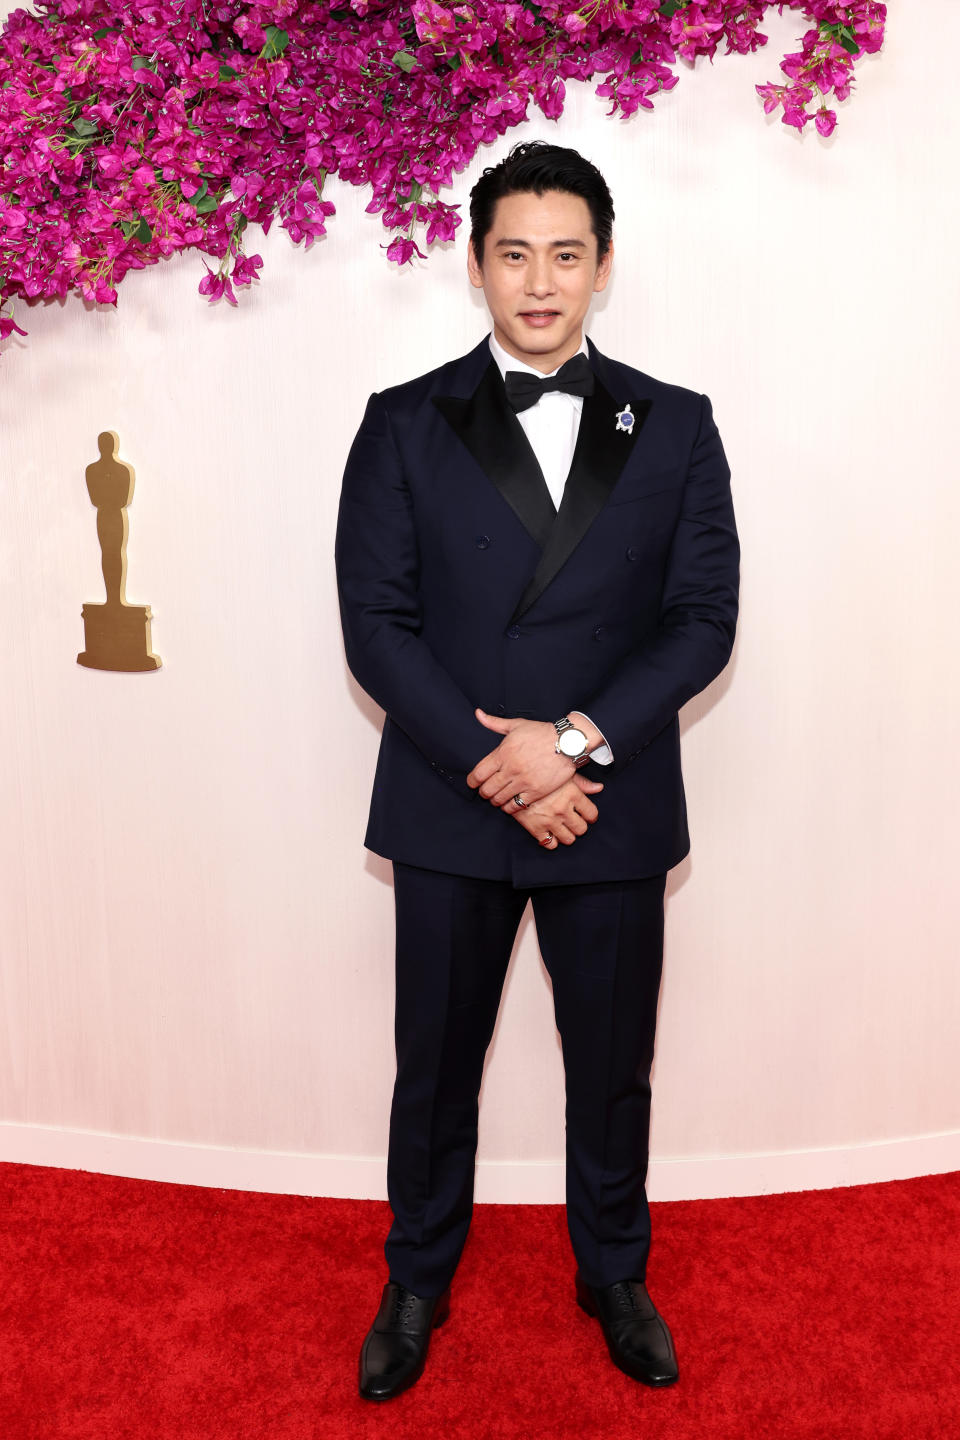 HOLLYWOOD, CALIFORNIA - MARCH 10: Teo Yoo attends the 96th Annual Academy Awards on March 10, 2024 in Hollywood, California. (Photo by Marleen Moise/Getty Images)